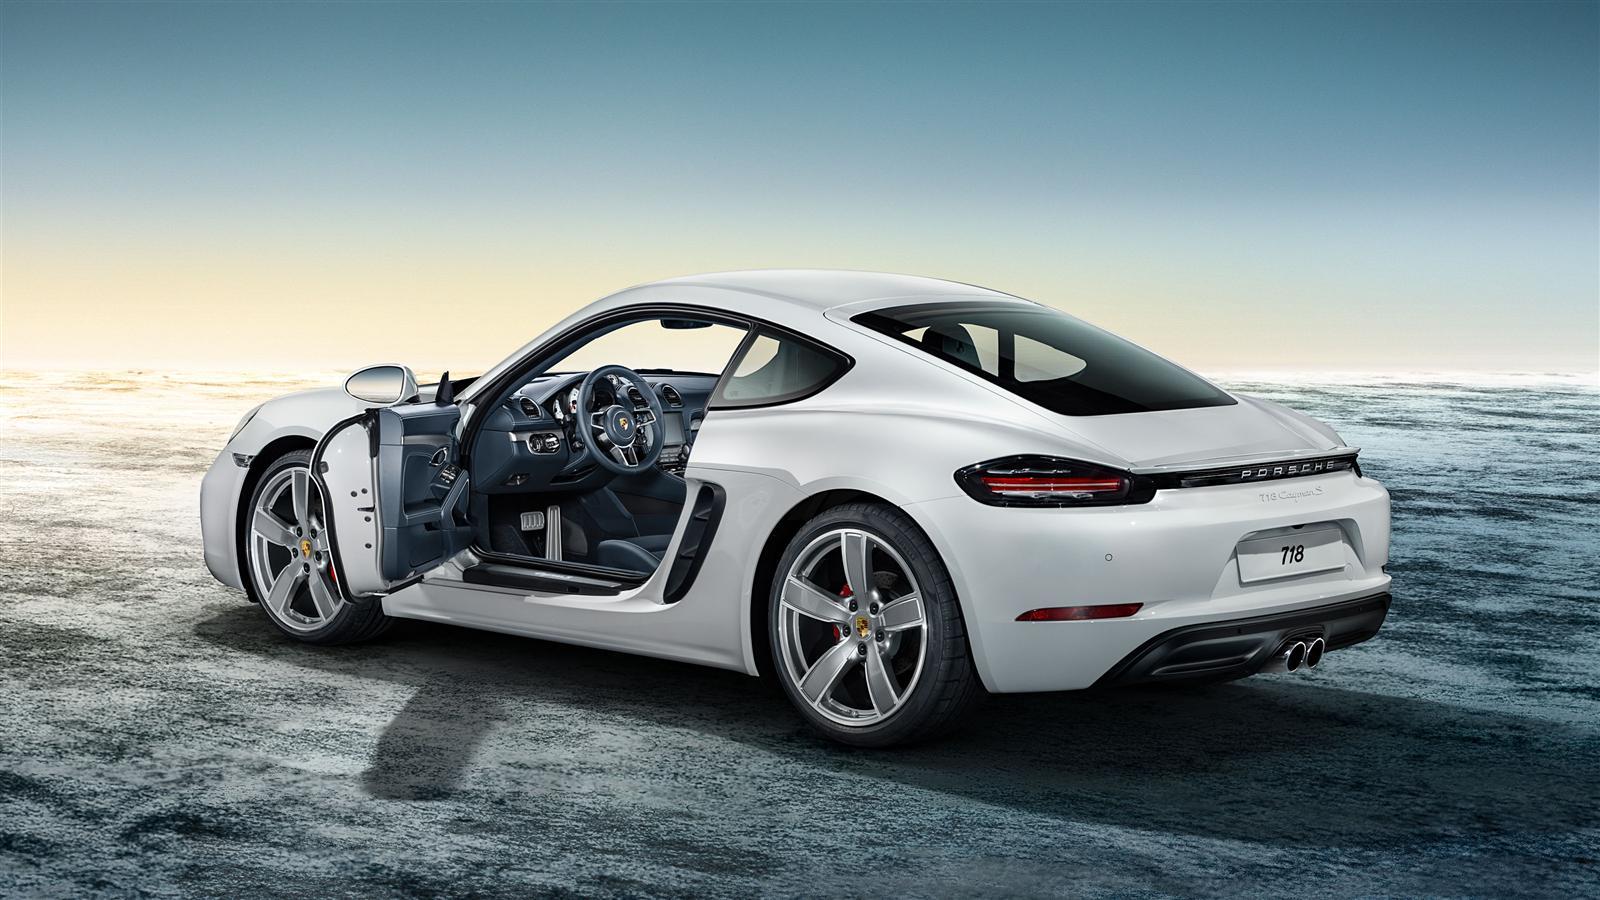 Porsche 718 Cayman And Boxster To Get N A Flat Six 3.8 Litre